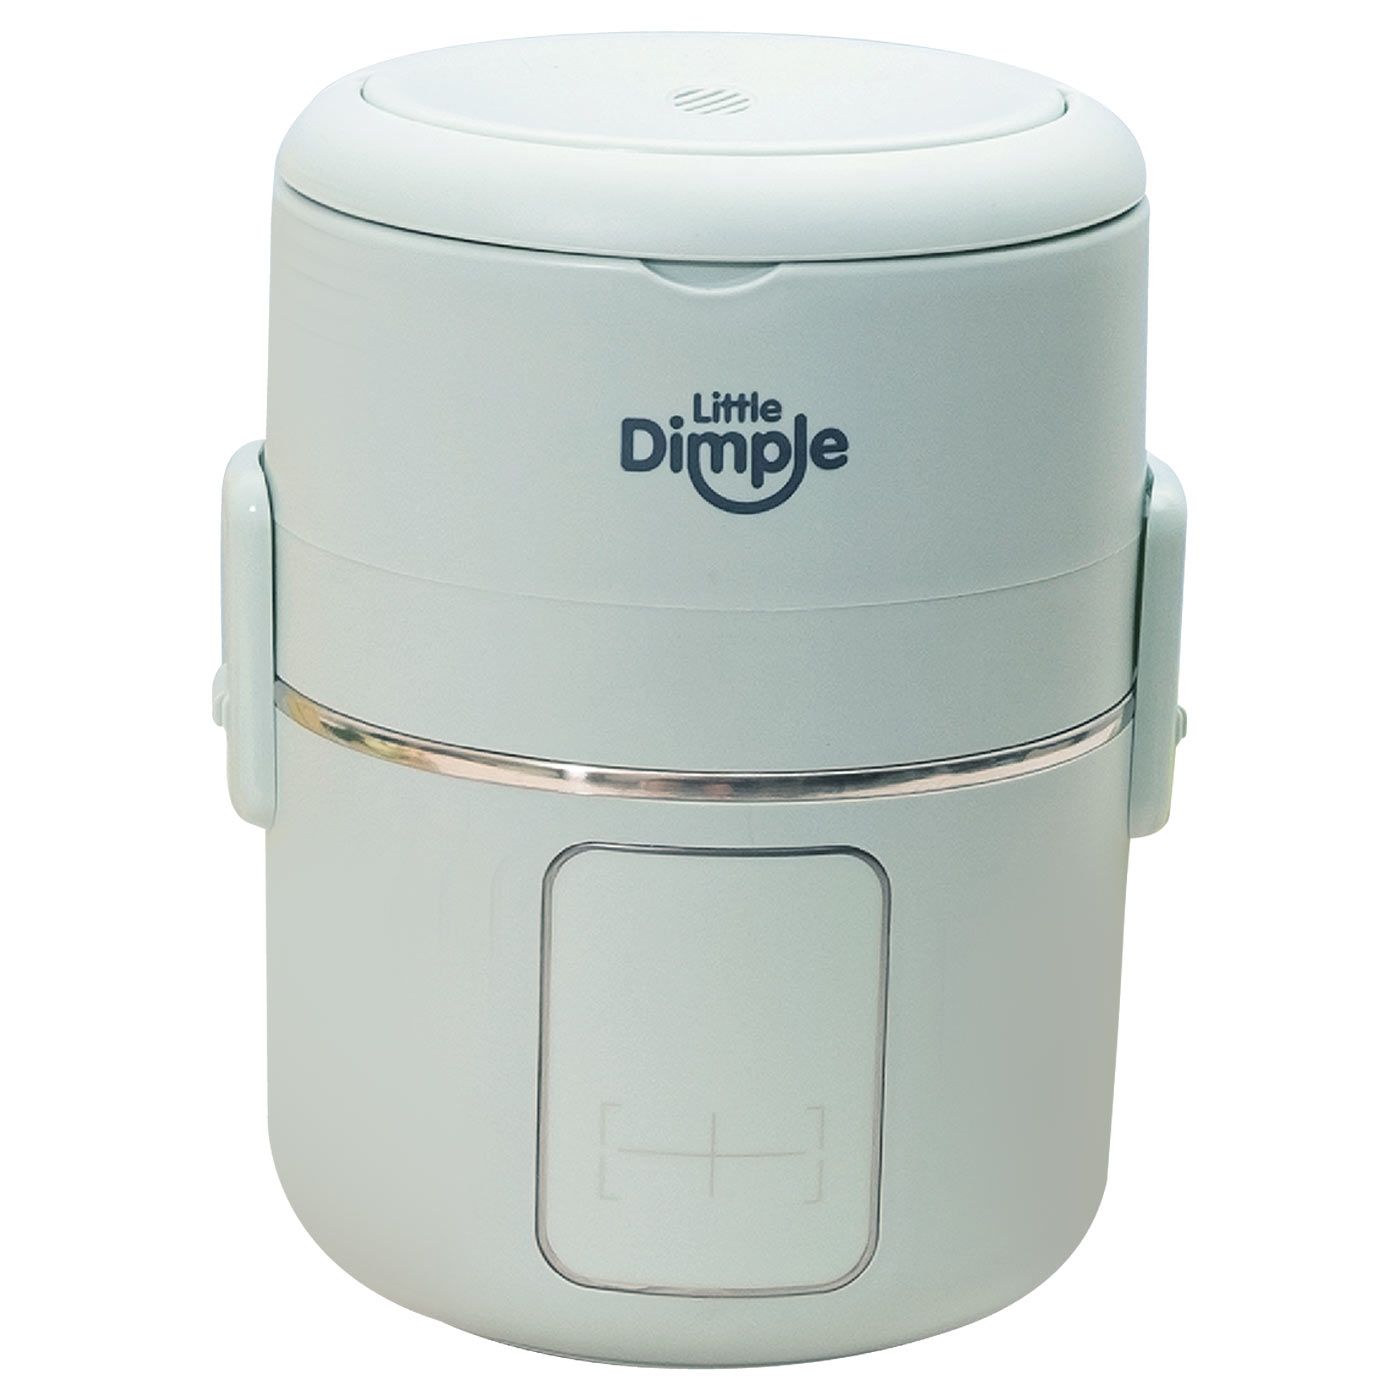 Little Dimple Portable Cooker Green - 1